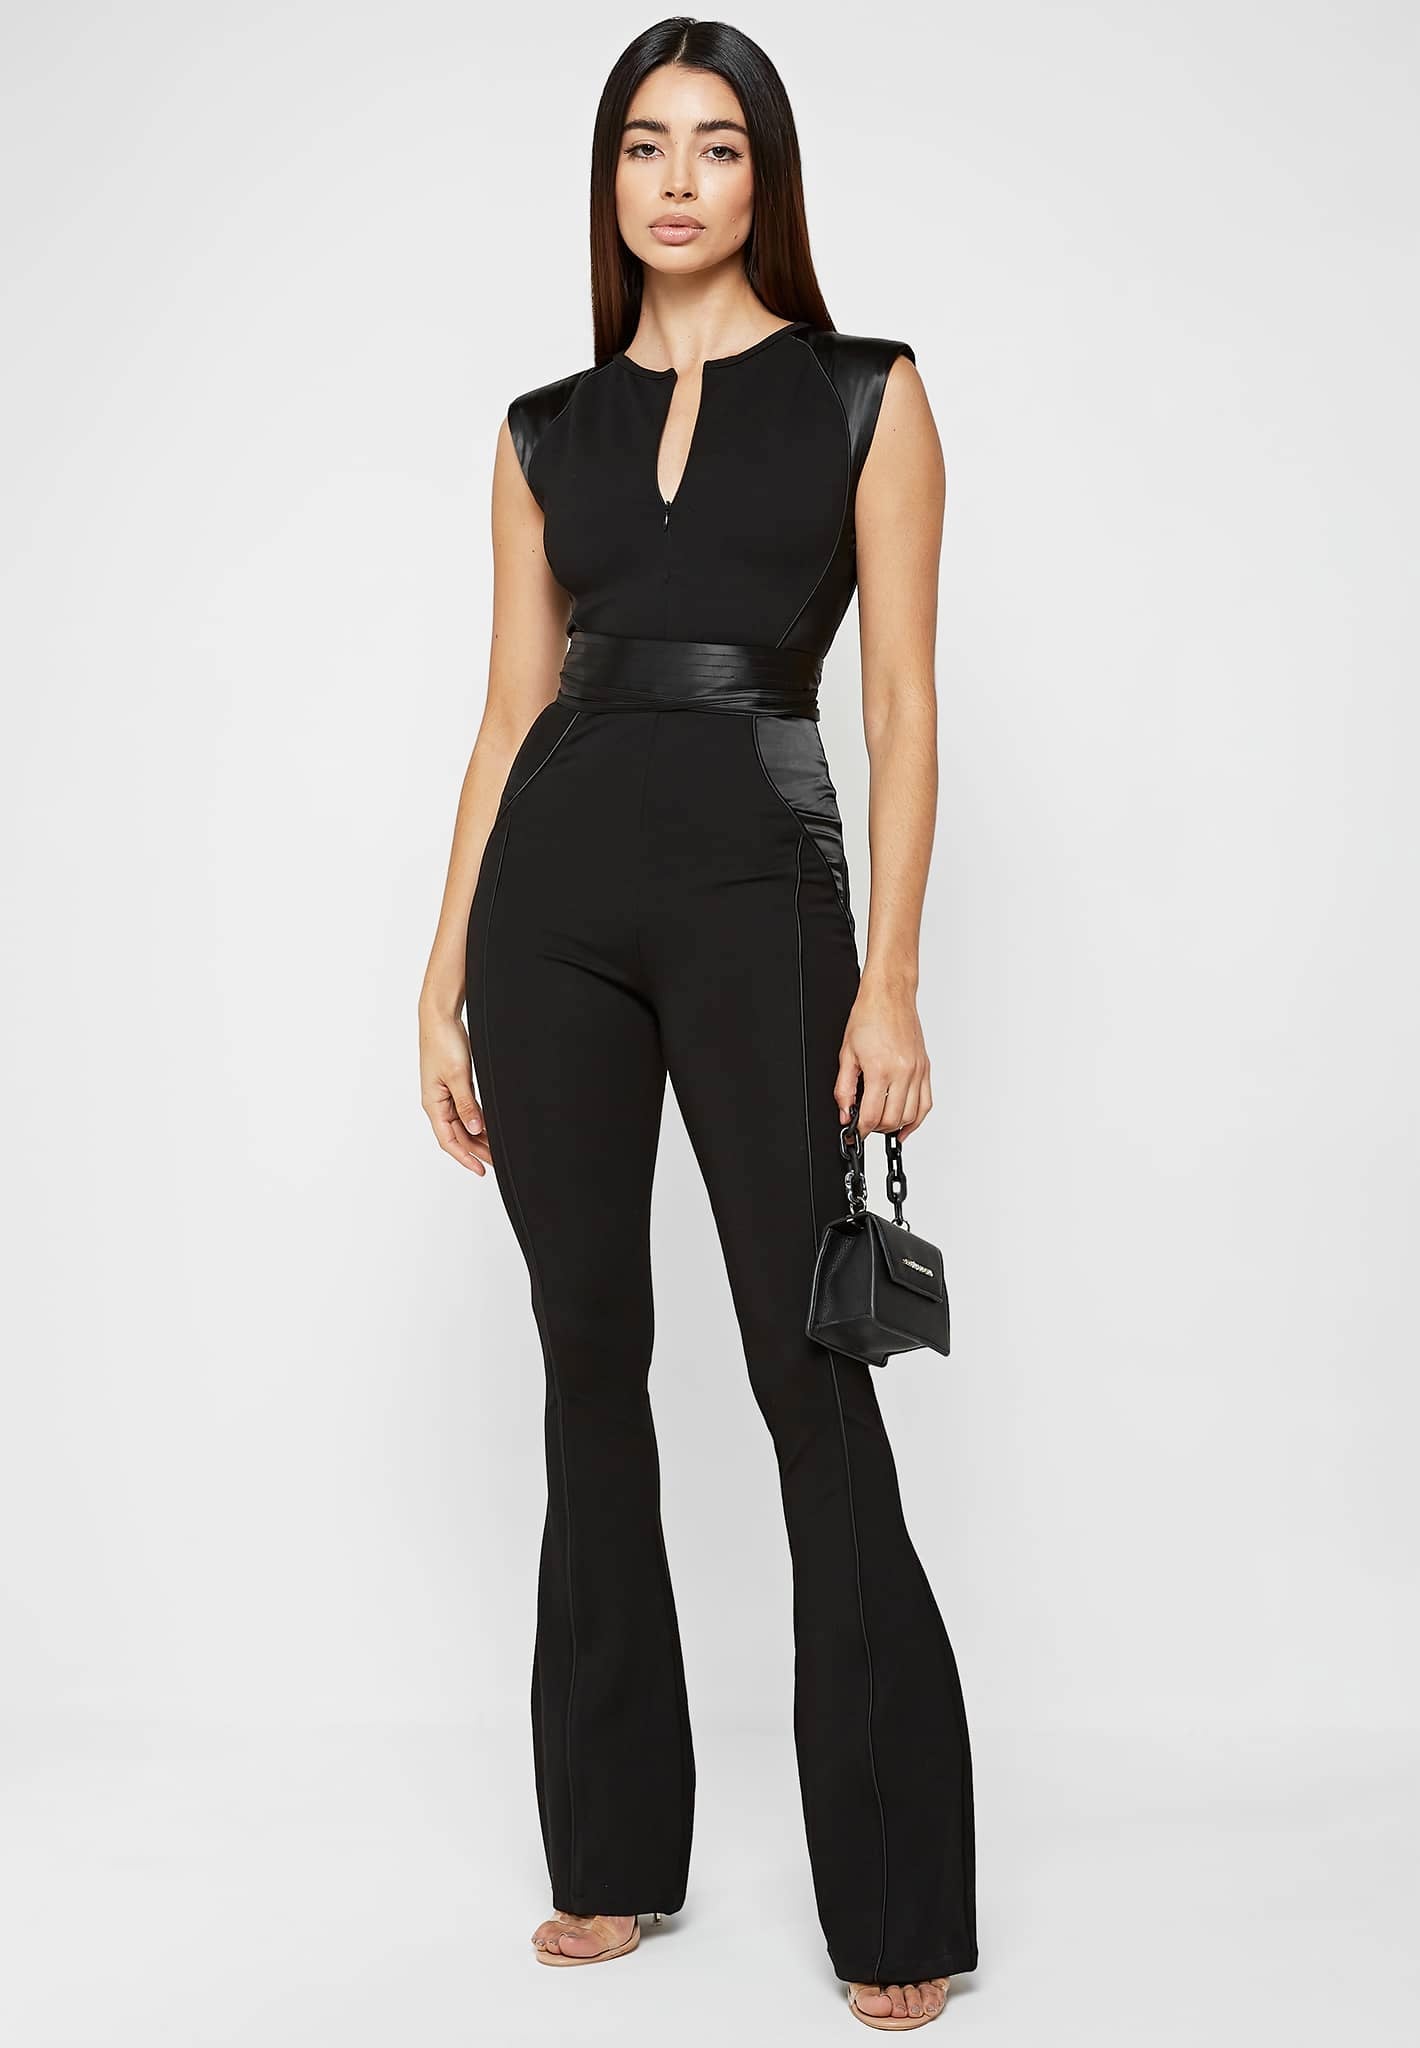 Wide Leg Jumpsuit With Ruched Detailing. Carbon - Catherines of